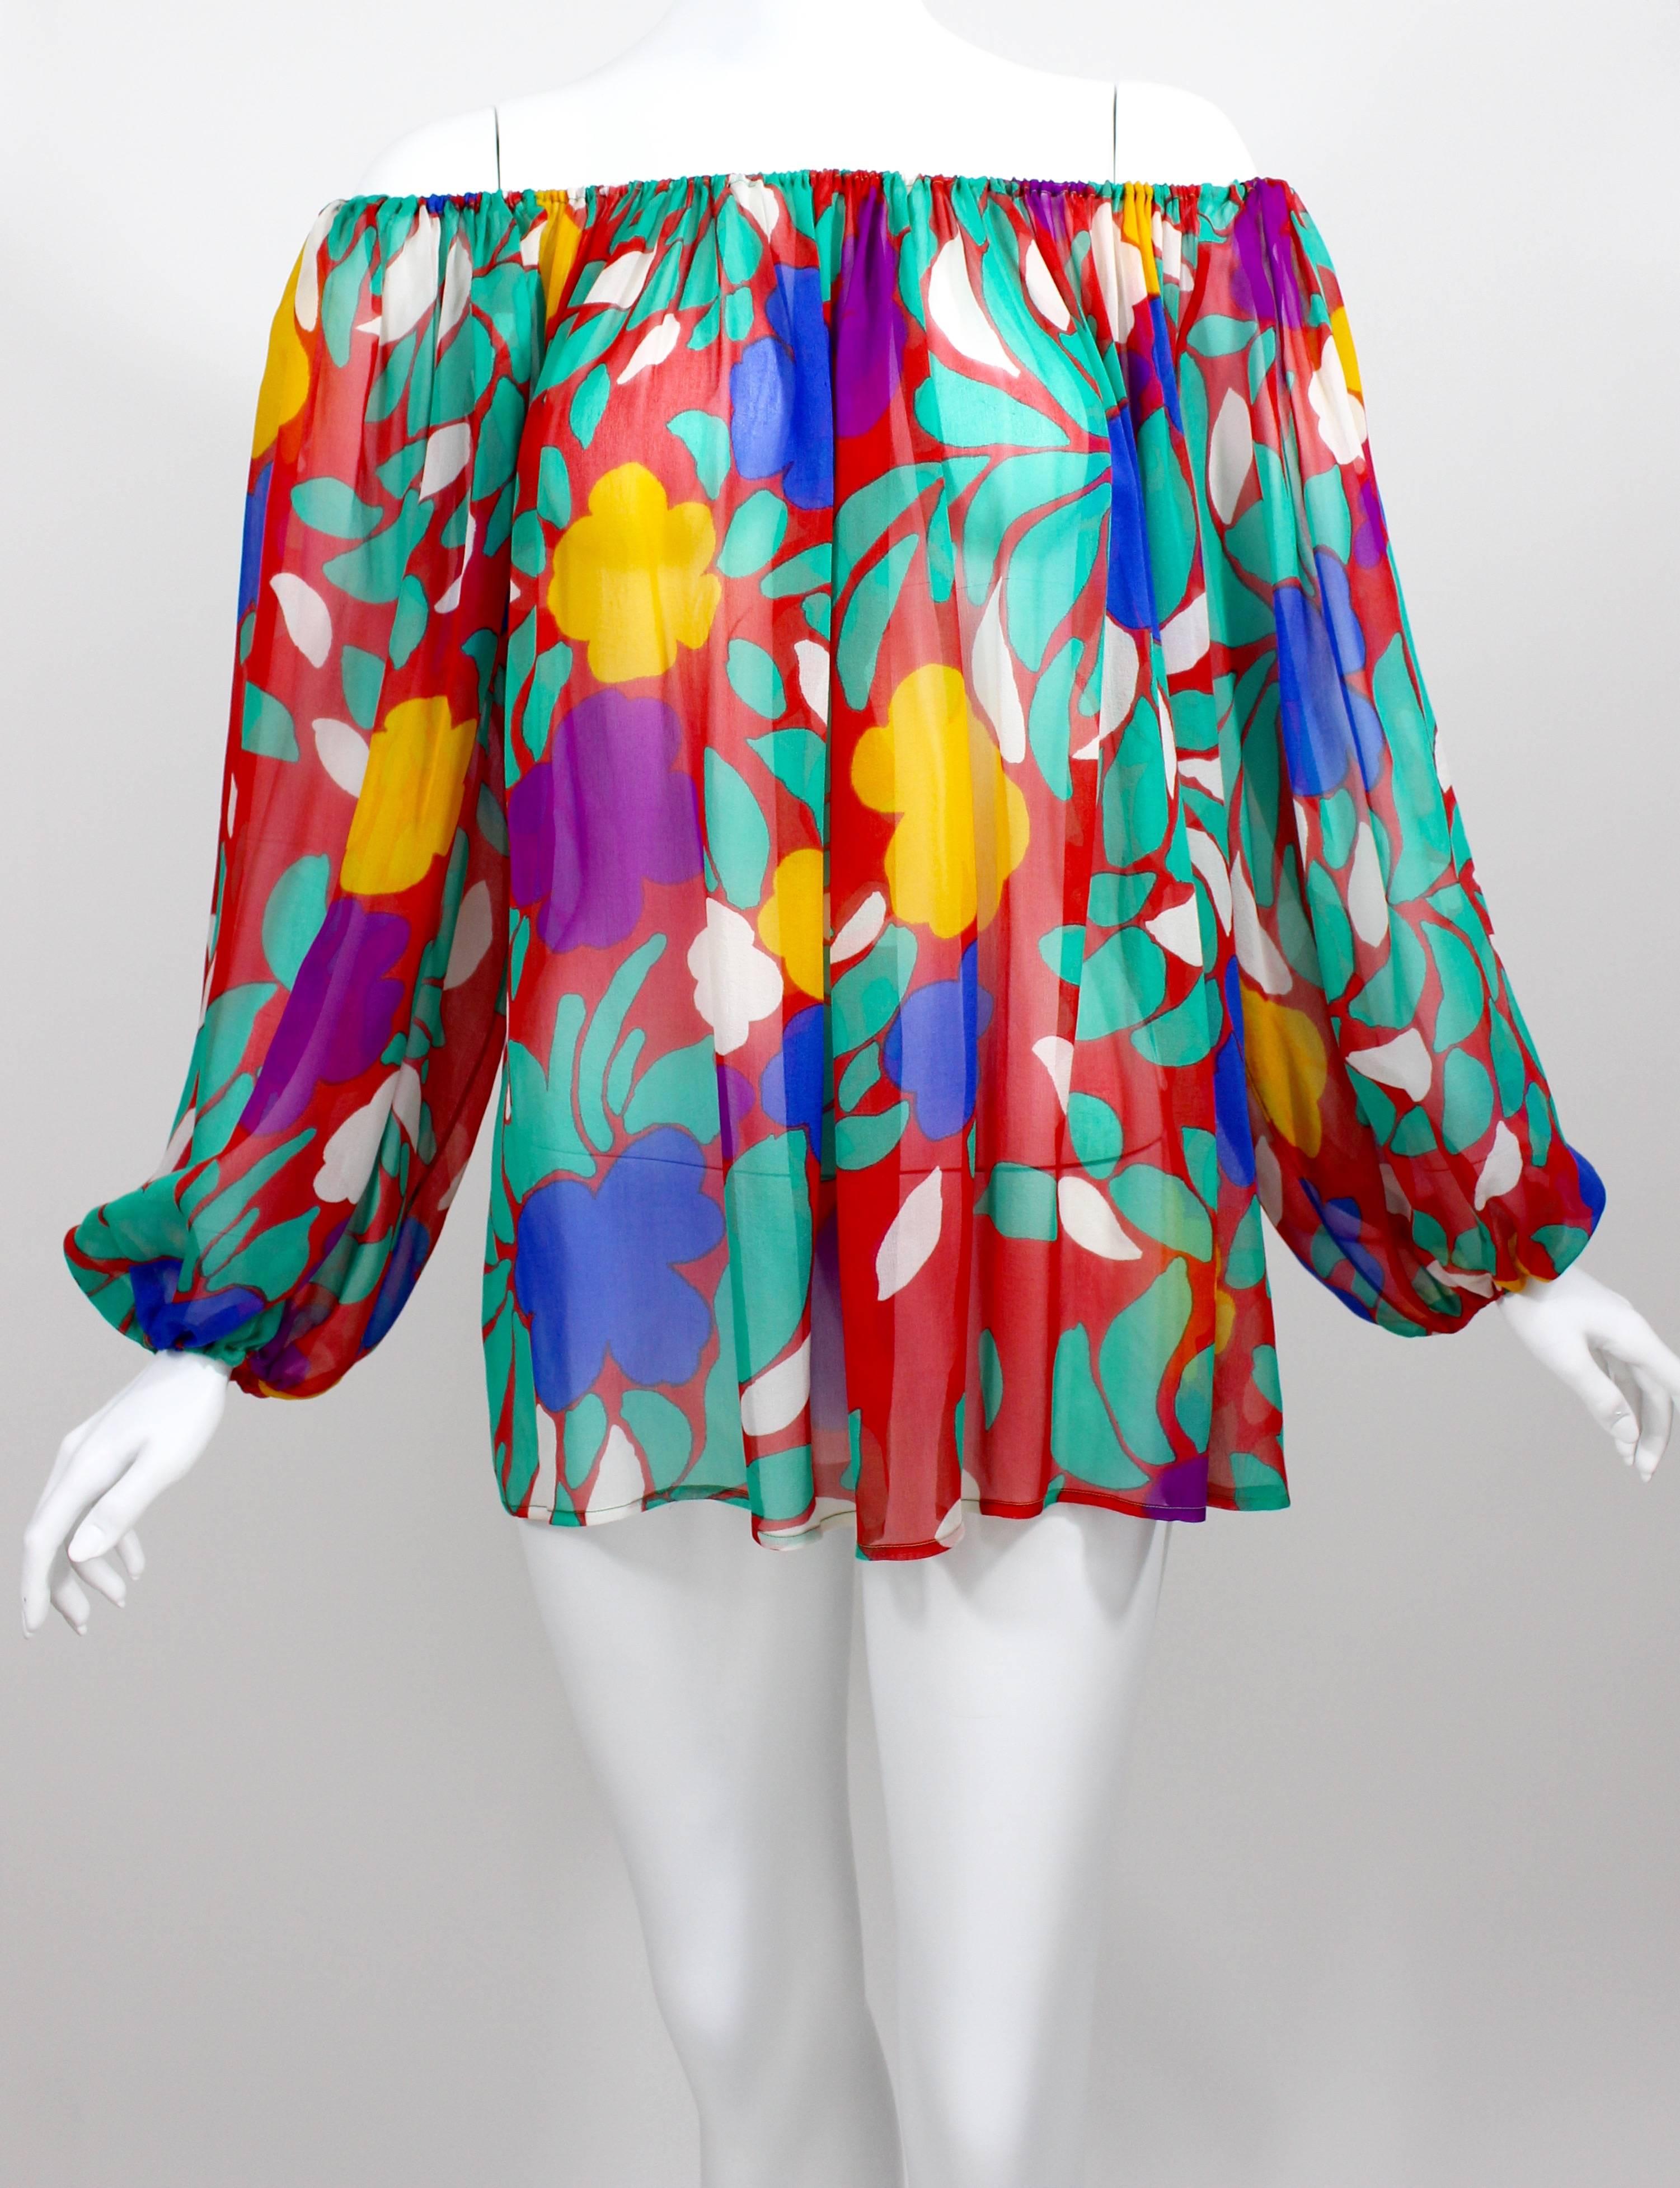 Yves Saint Laurent Silk Chiffon Colorful Floral Print Blouse Documented YSL 1979 For Sale 1